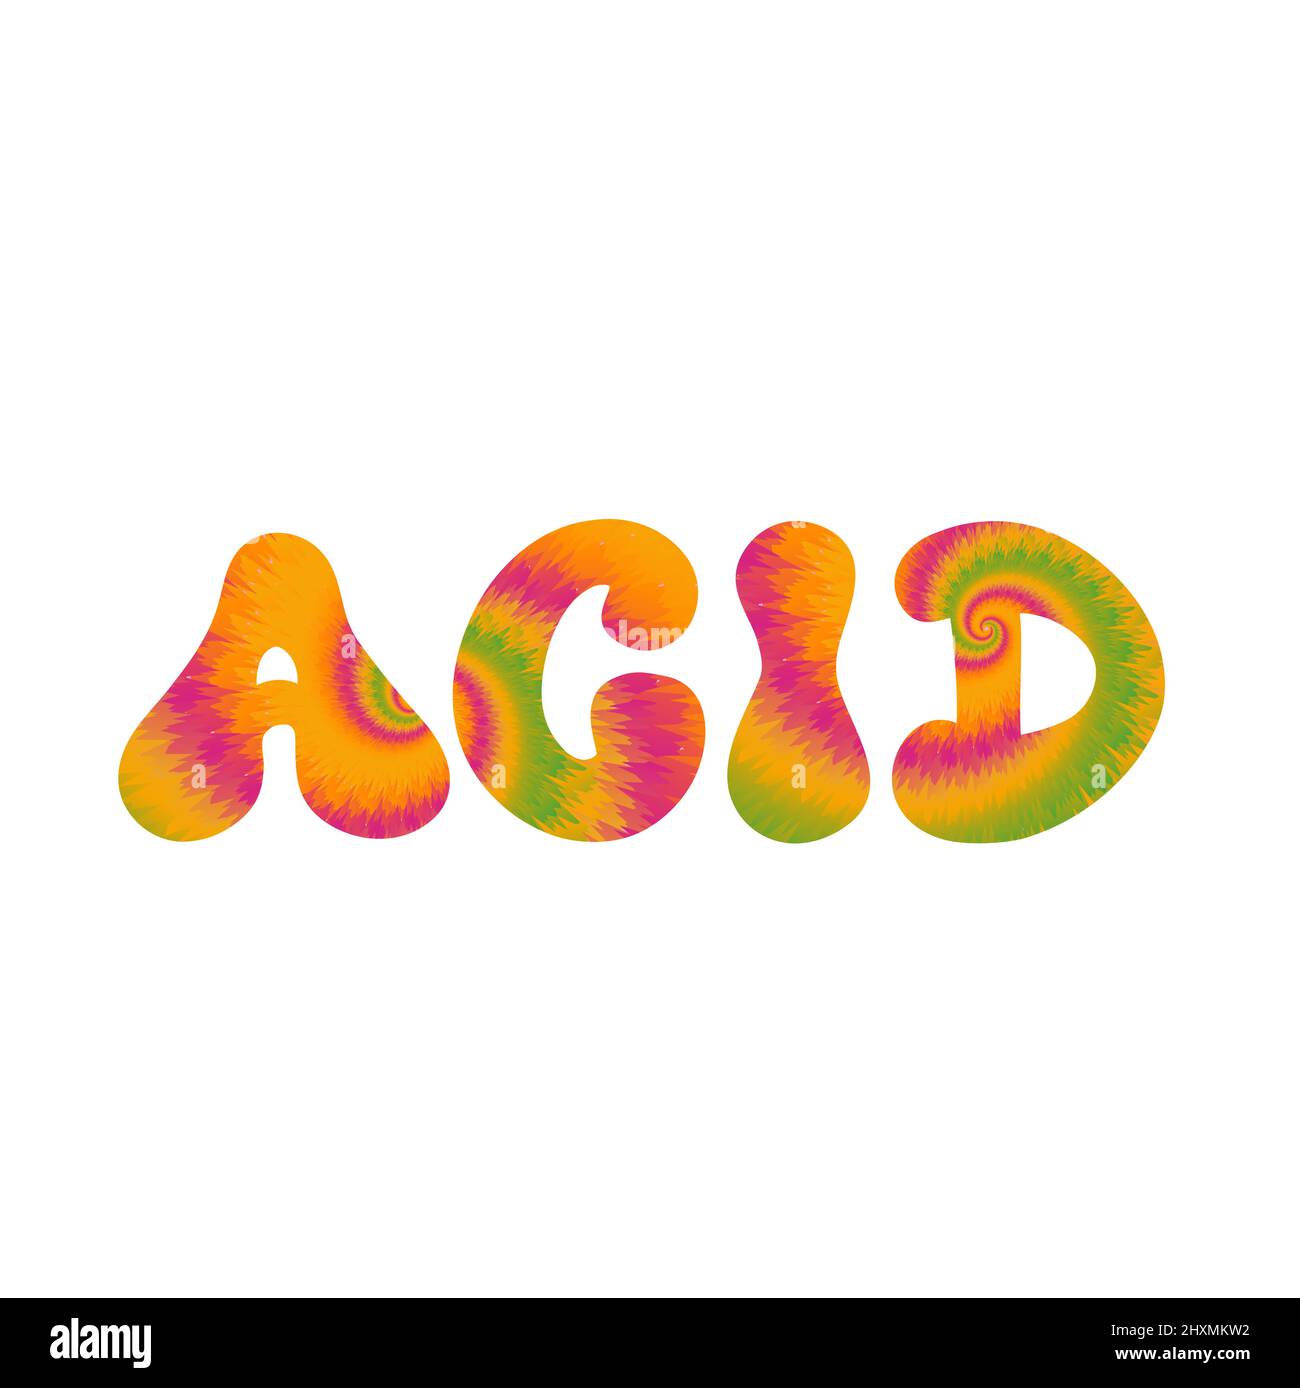 Acid quote. Tie dye psychedelic font lettering.Vector tiedye illustration logo.Acid text.60s,70s,groovy,tie dye psychedelic,trippy print for t-shirt,poster,sticker concept Stock Vector